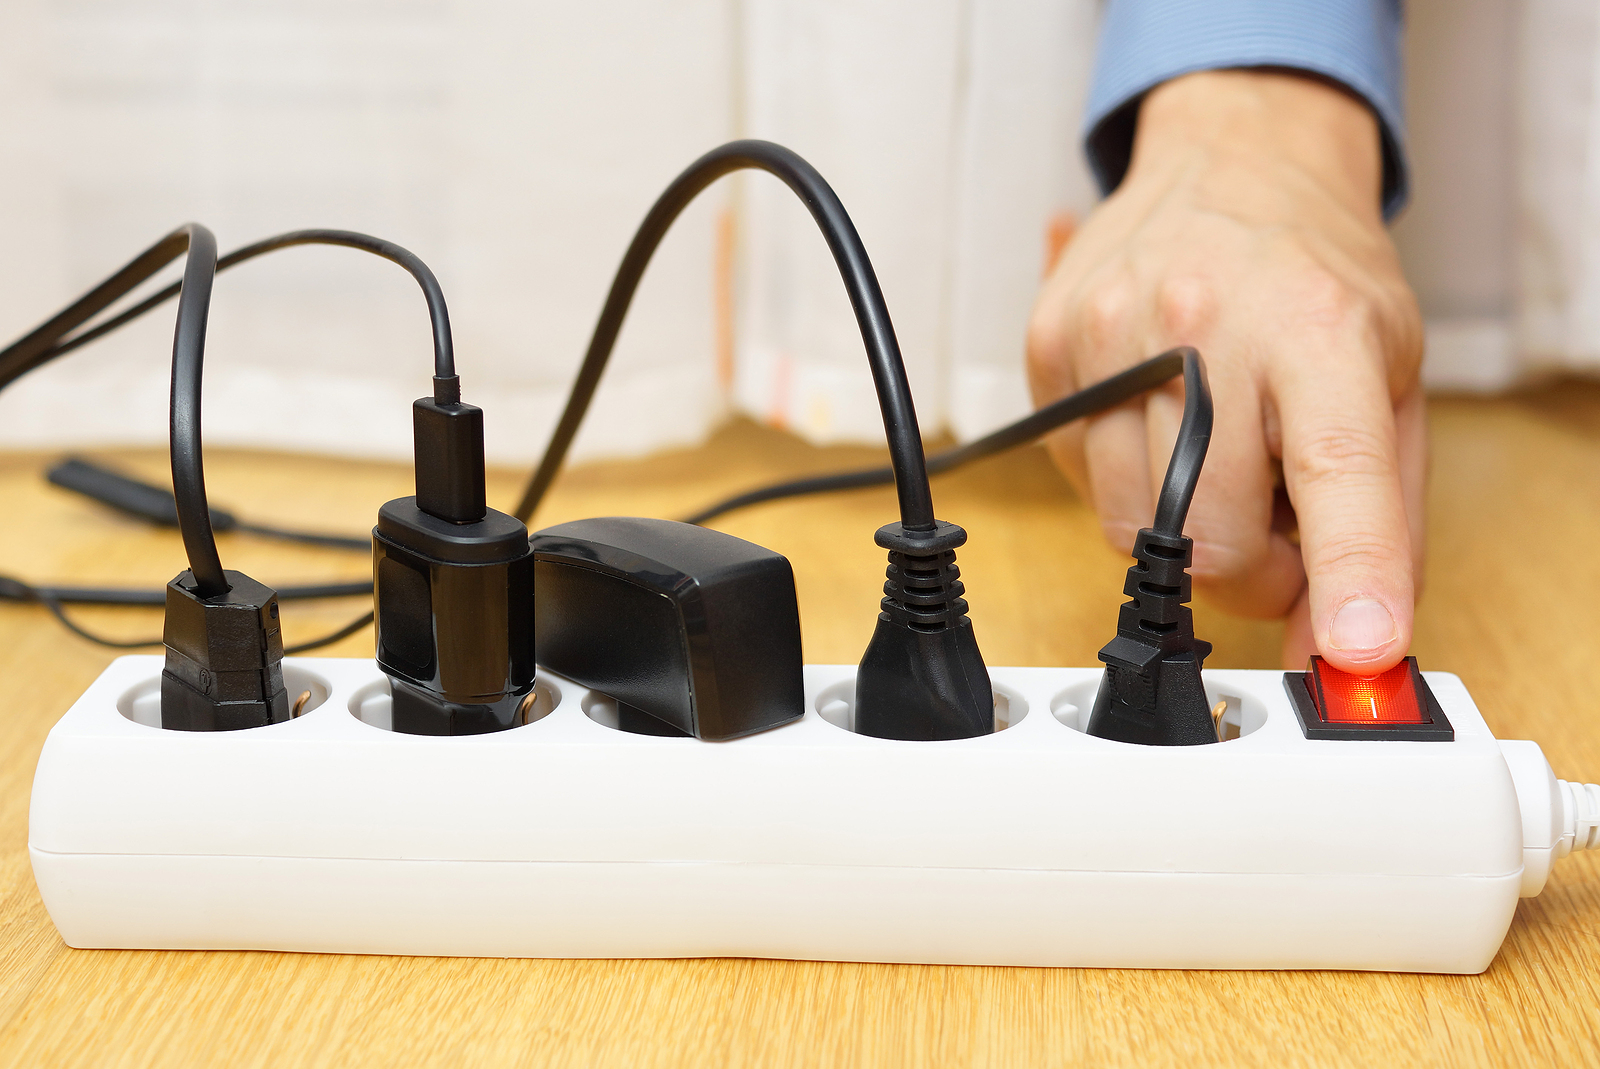 commercial gas engineer - turning off electrical appliances